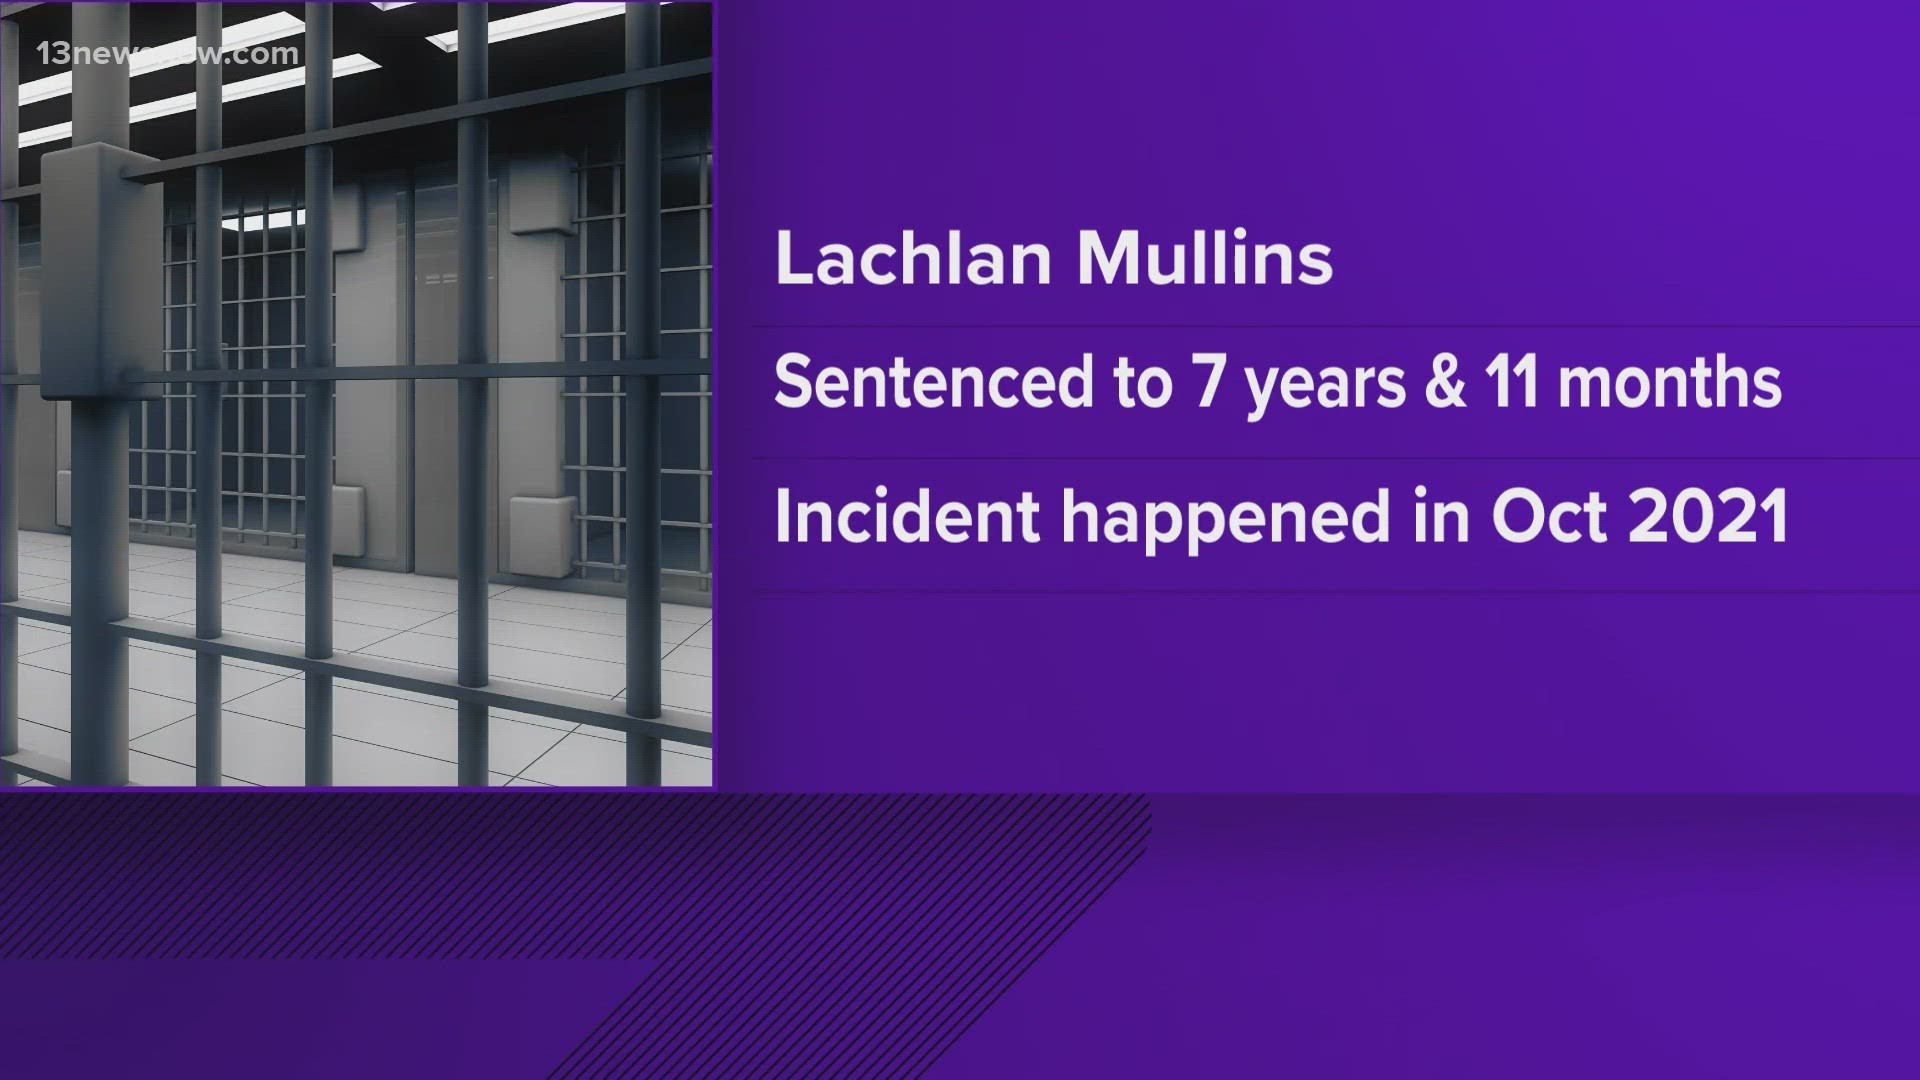 Lachlan Mullins was charged with rape in October 2021.